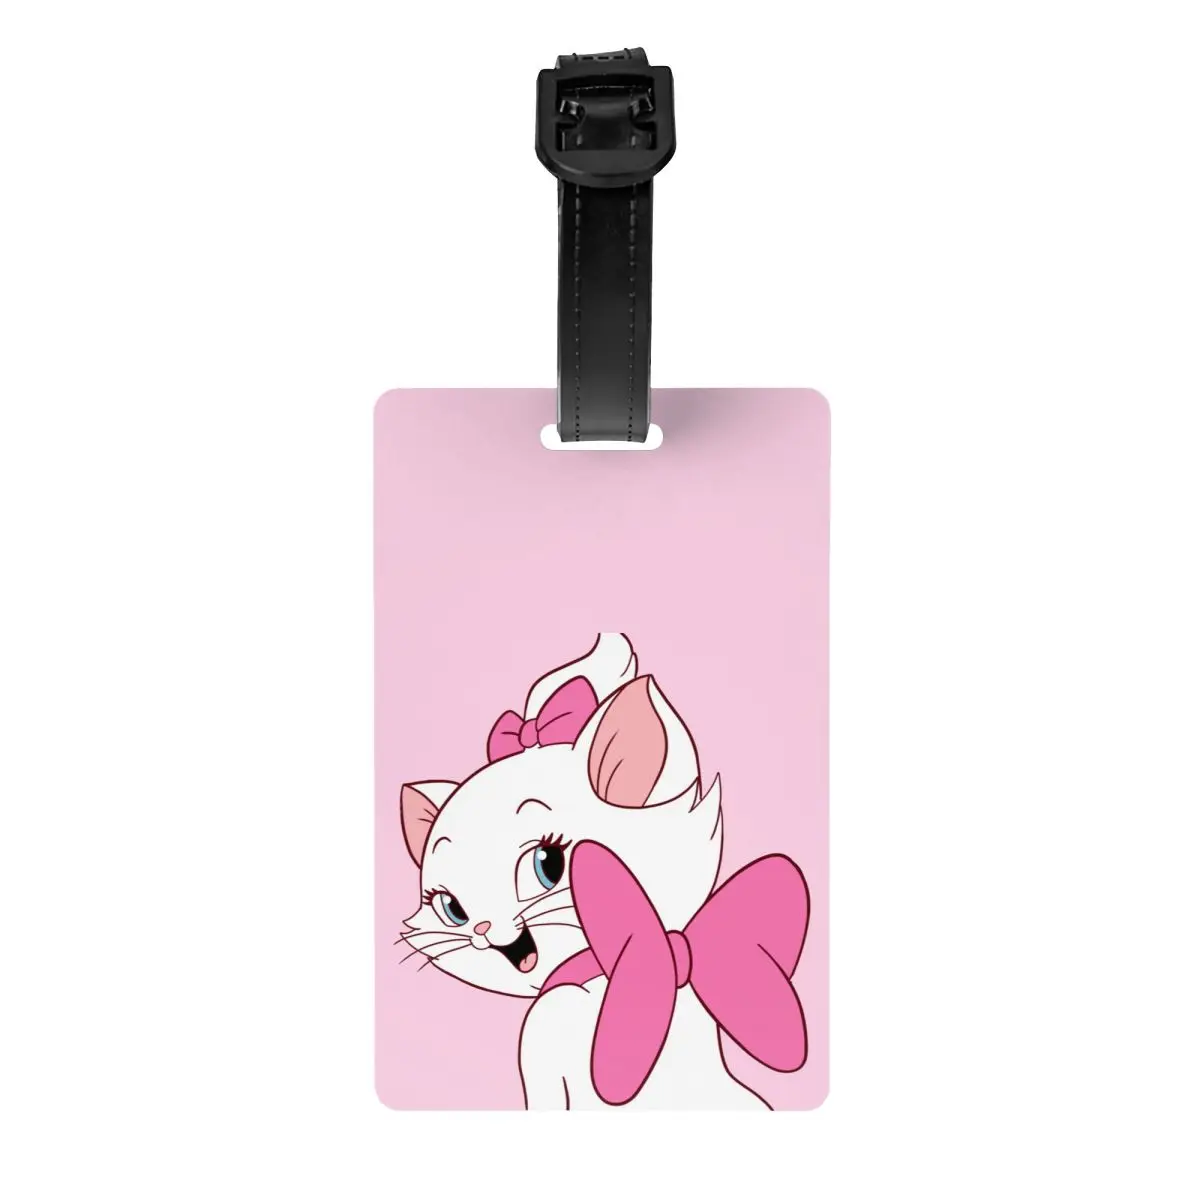 

Aristocats Cute Baby Kitty Bows Looking Back Luggage Tag With Name Card Privacy Cover ID Label for Travel Bag Suitcase